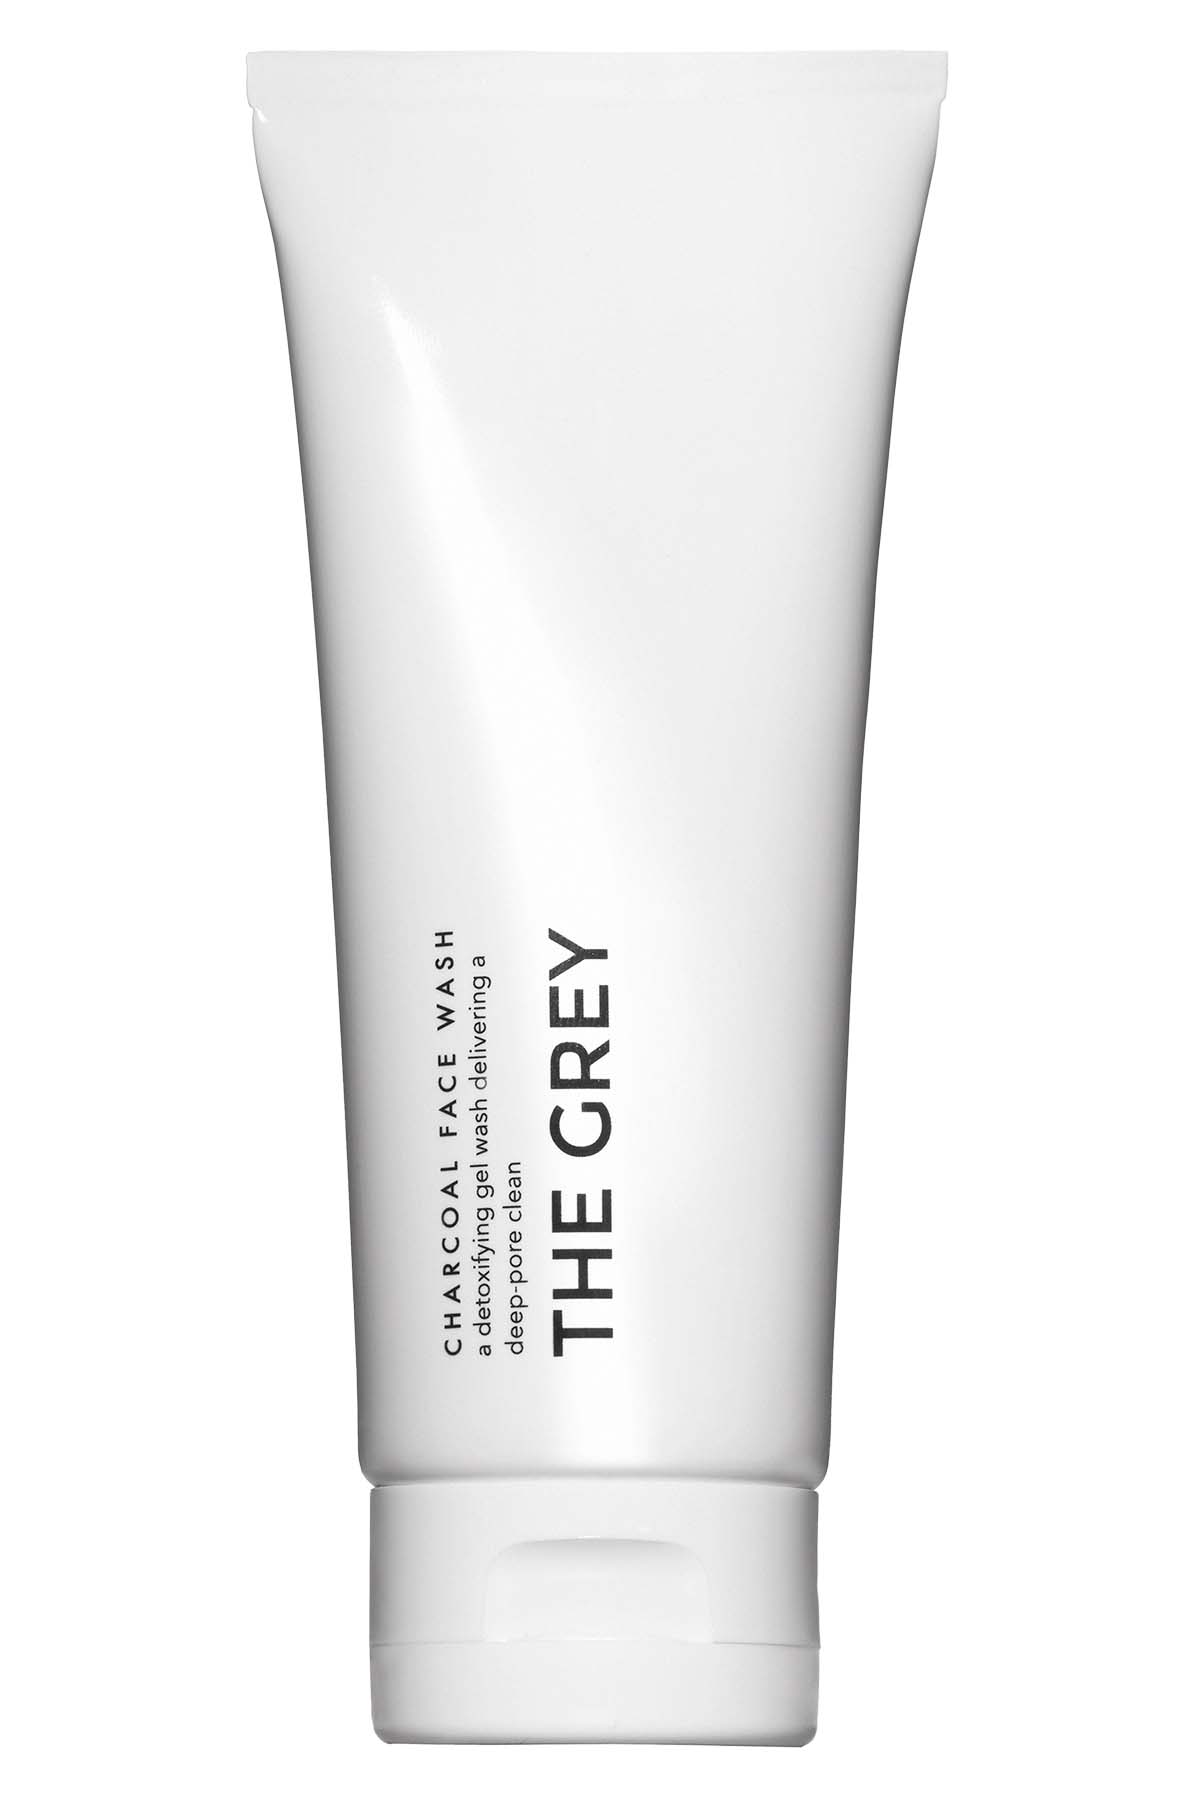 The Grey Men's Skincare Charcoal Face Wash 100ML